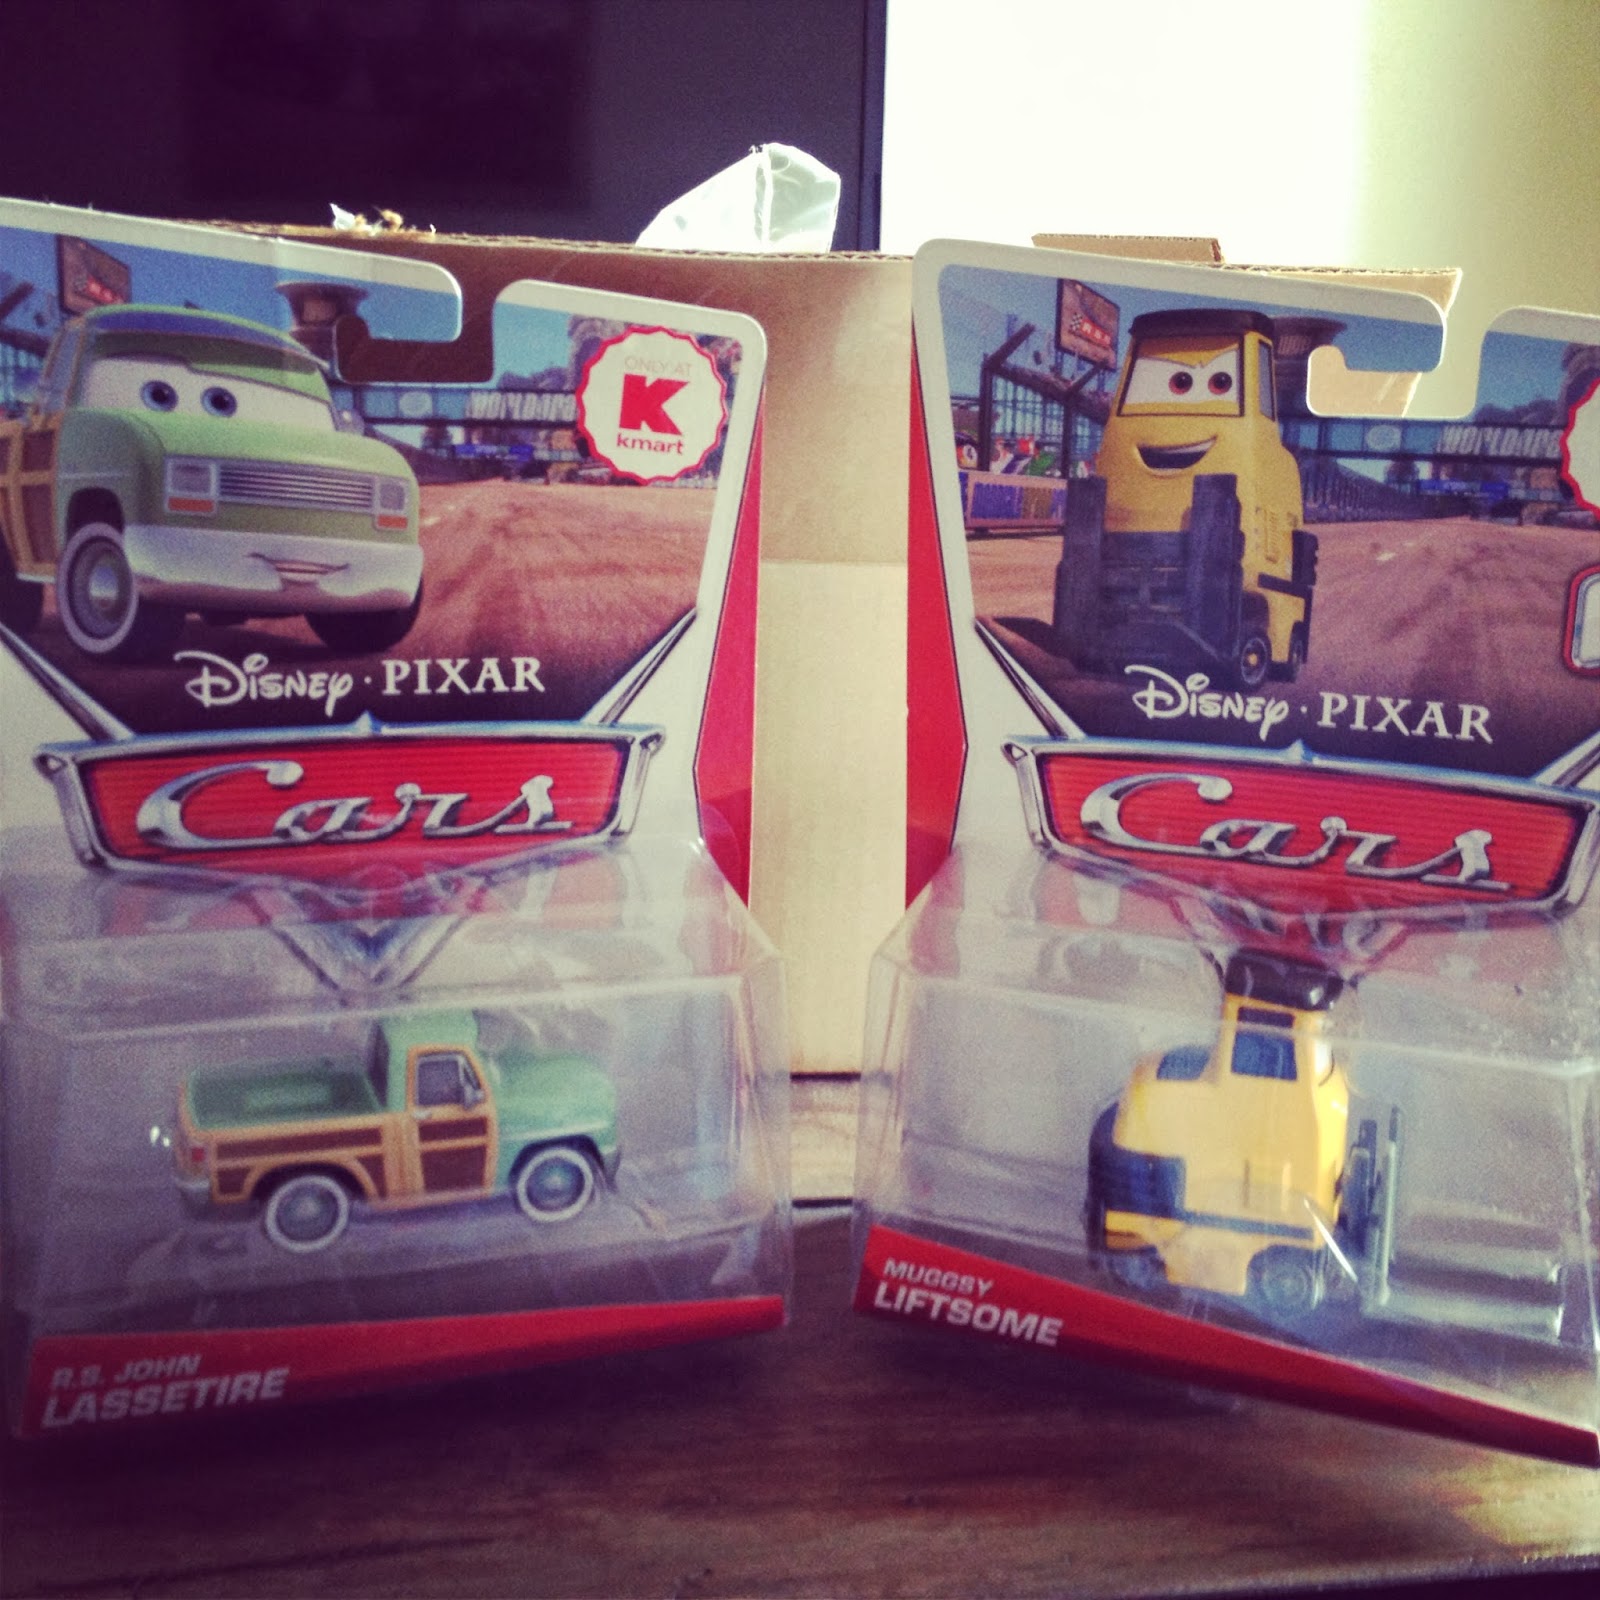 Lucht Belastingen Transparant Dan the Pixar Fan: Cars 2: Kmart Exclusive Mail-Away R.S. John Lasetire and  Muggsy Liftsome